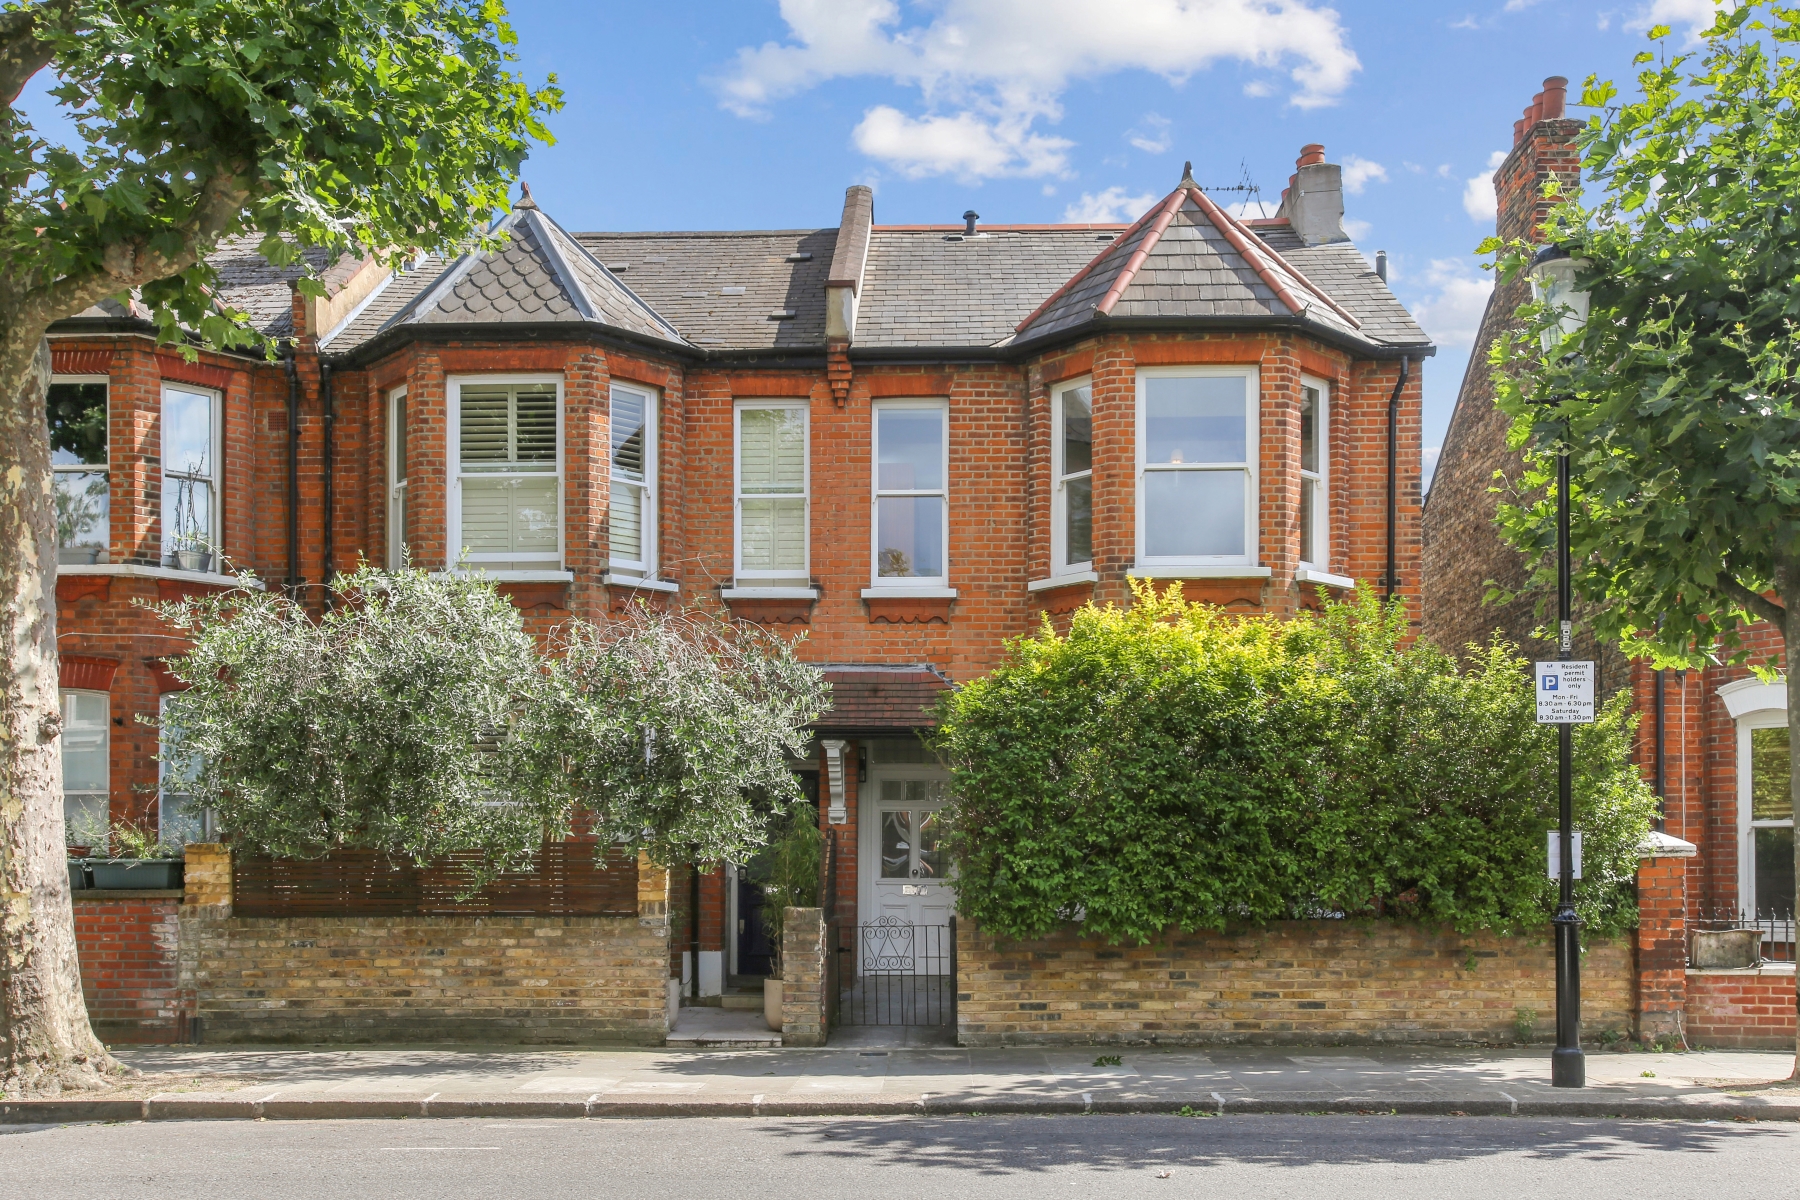 A beautiful four bedroom family house in Notting Hill